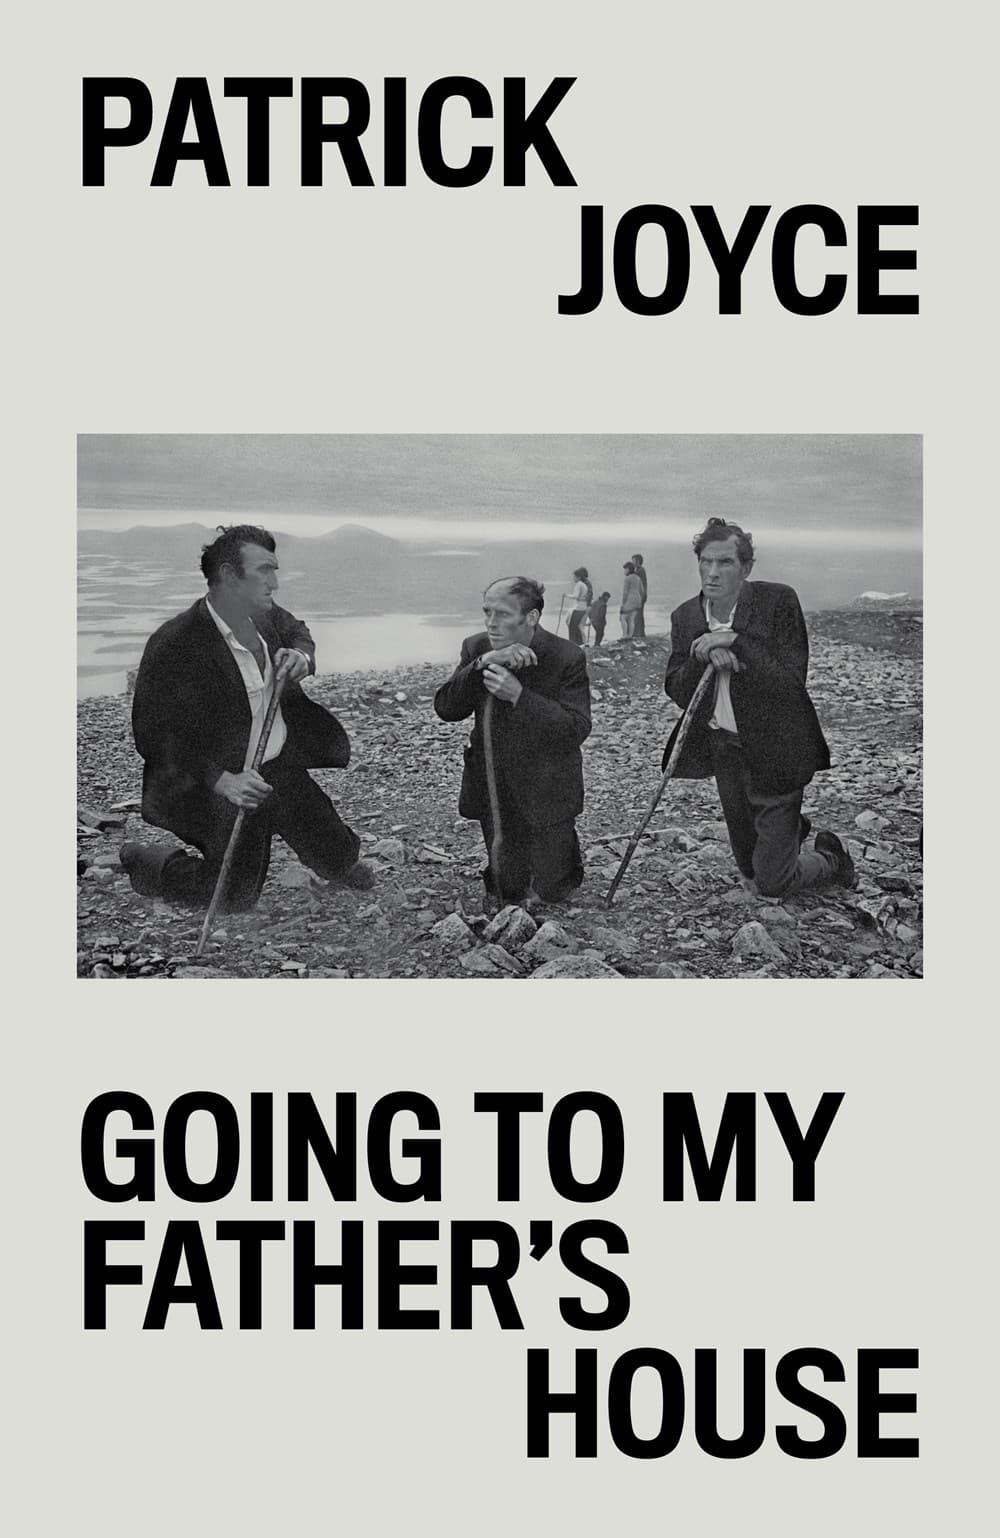 The cover for Patrick Joyce's 'Going to my Father's House'.